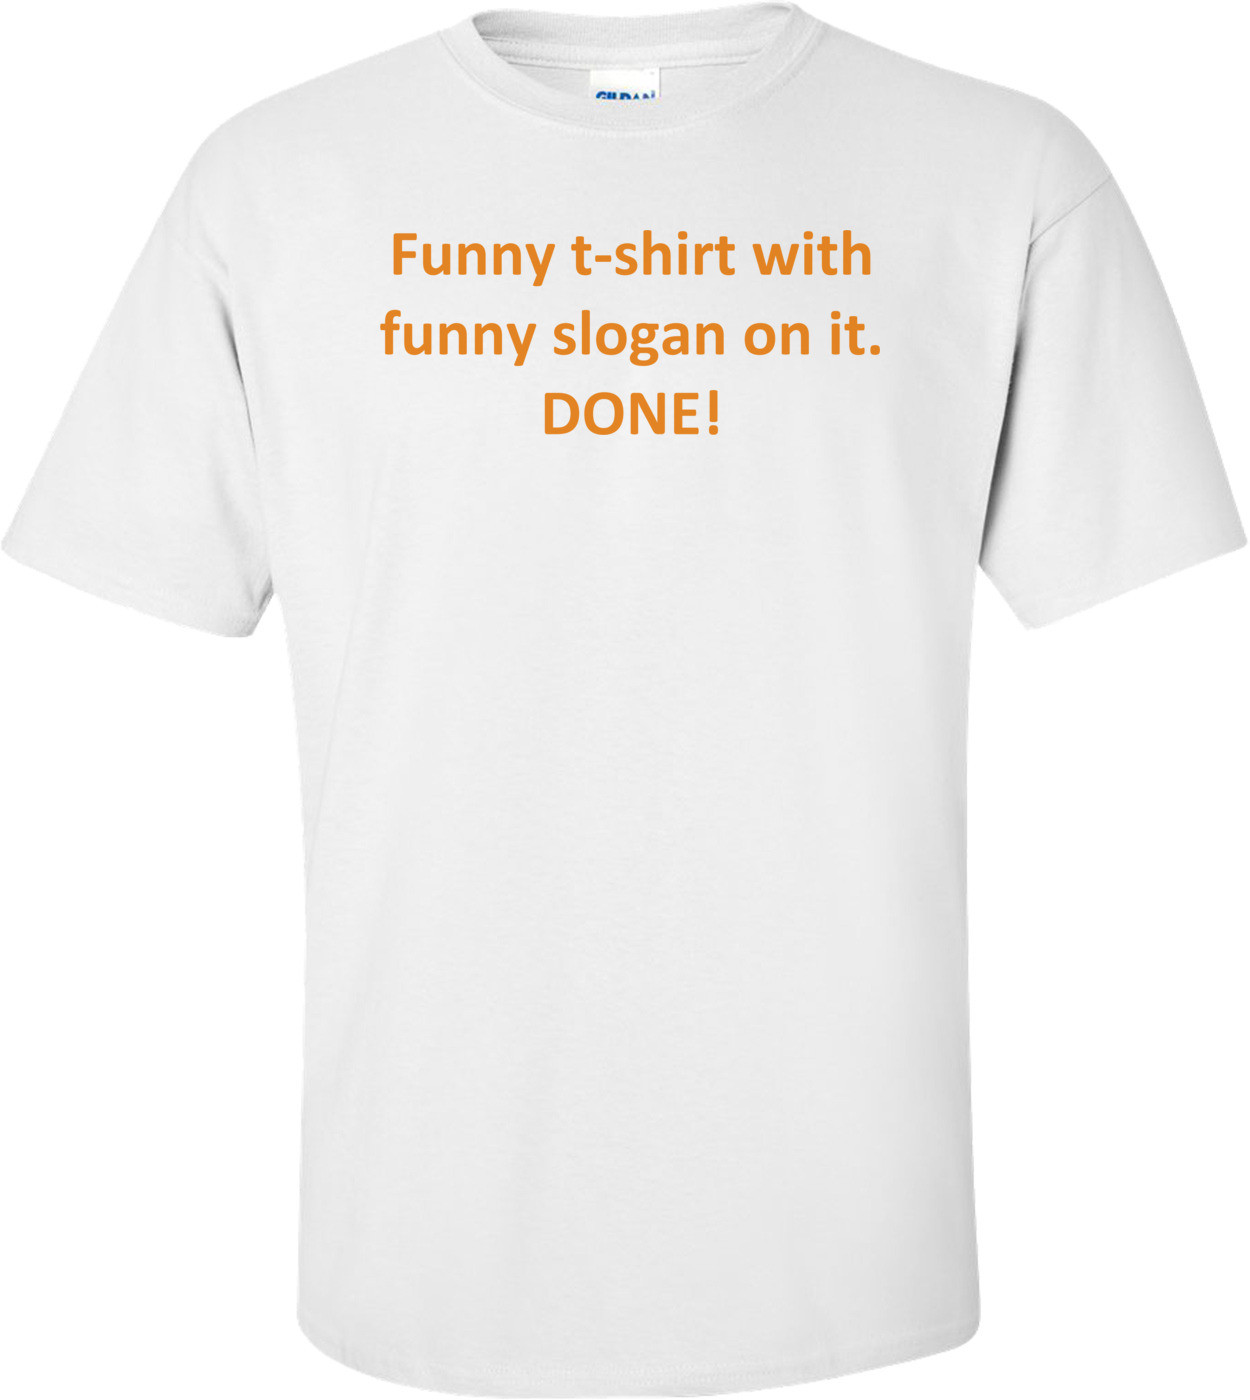 Funny t-shirt with funny slogan on it. DONE! Shirt